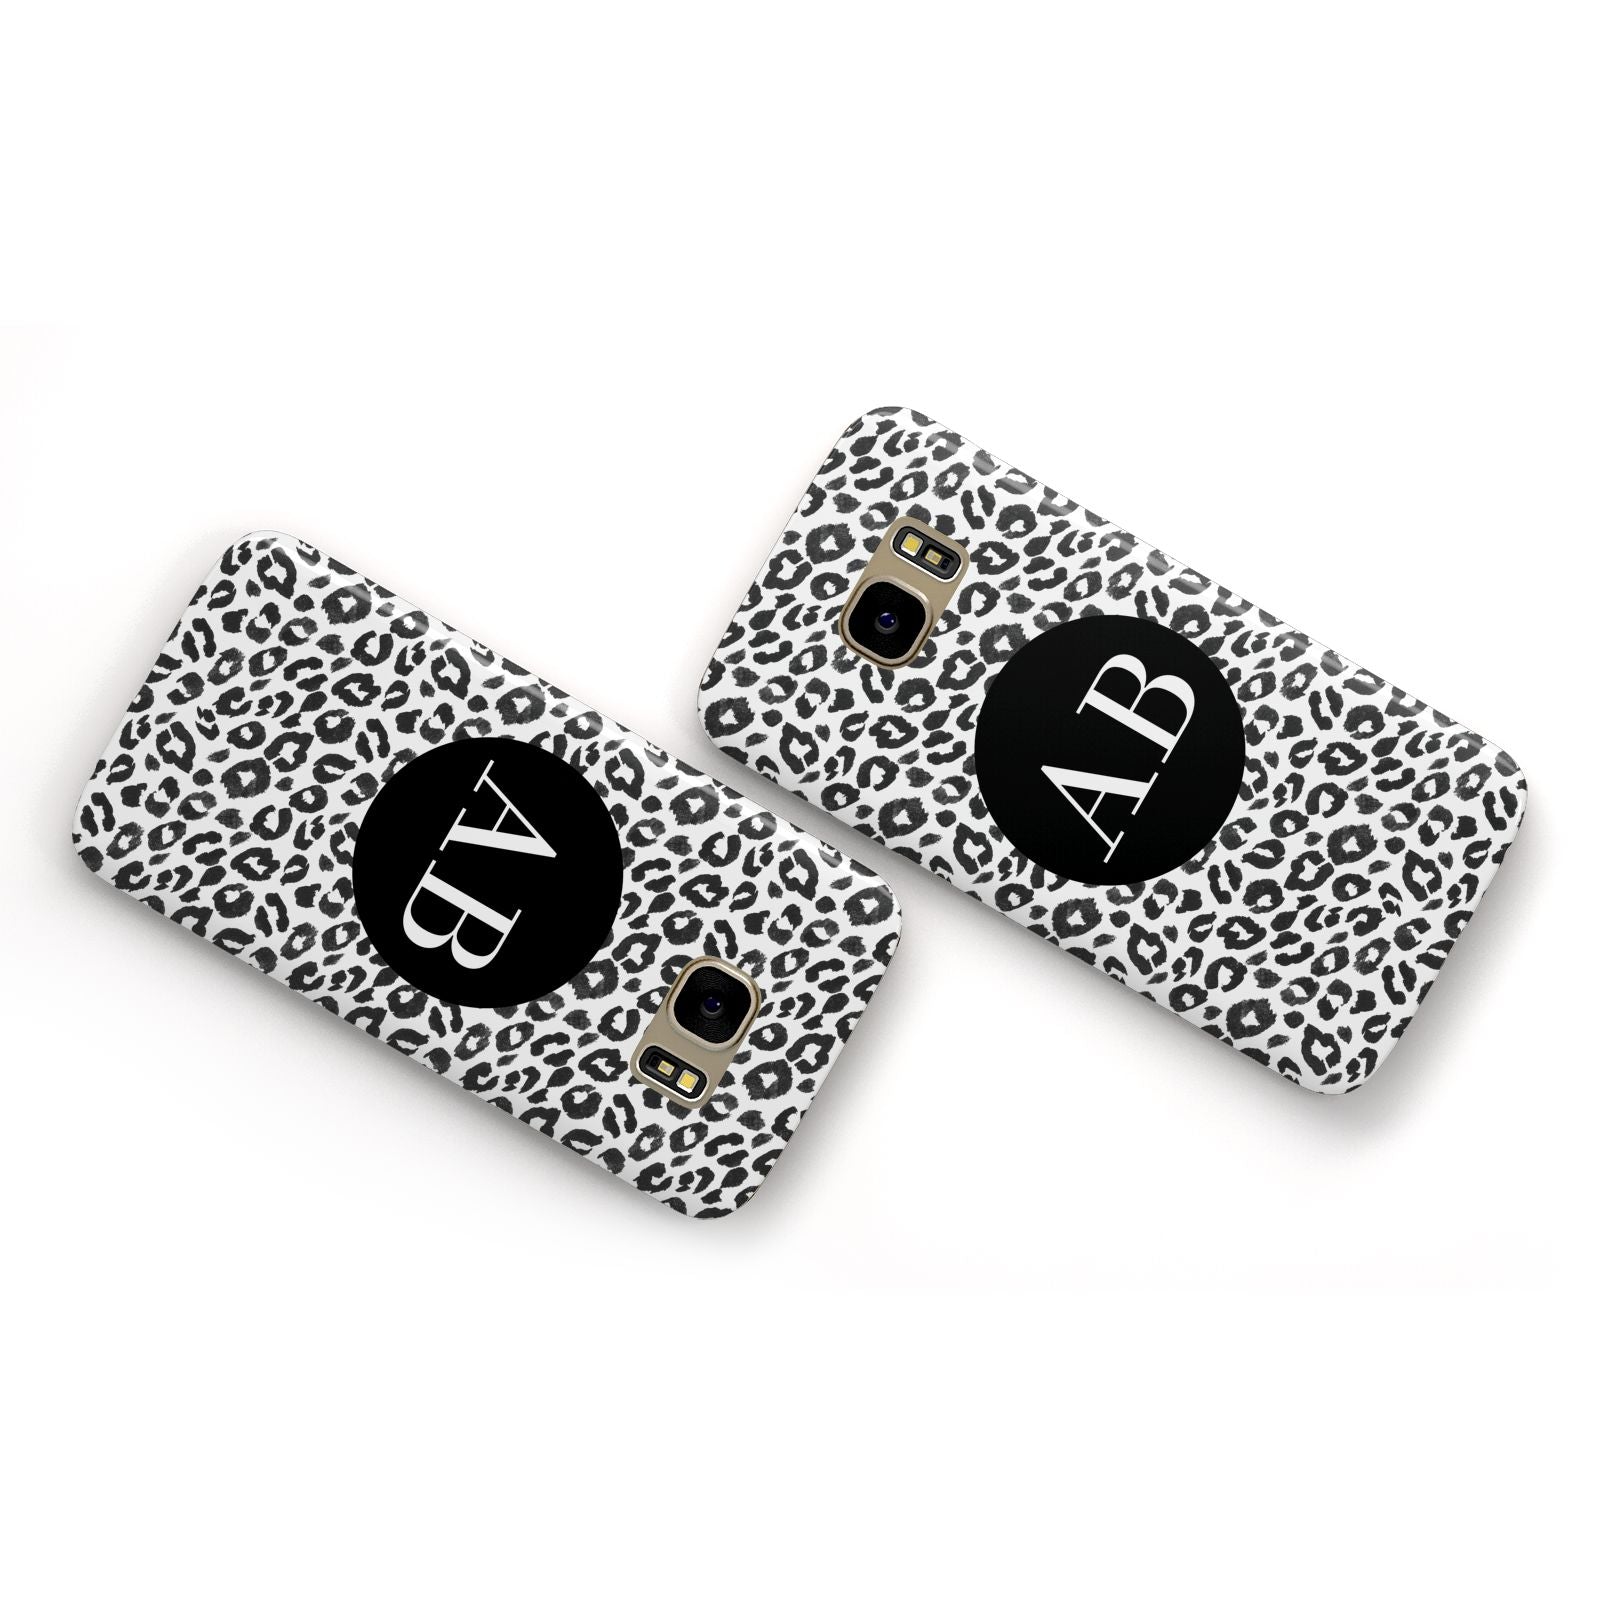 Leopard Print Black and White Samsung Galaxy Case Flat Overview